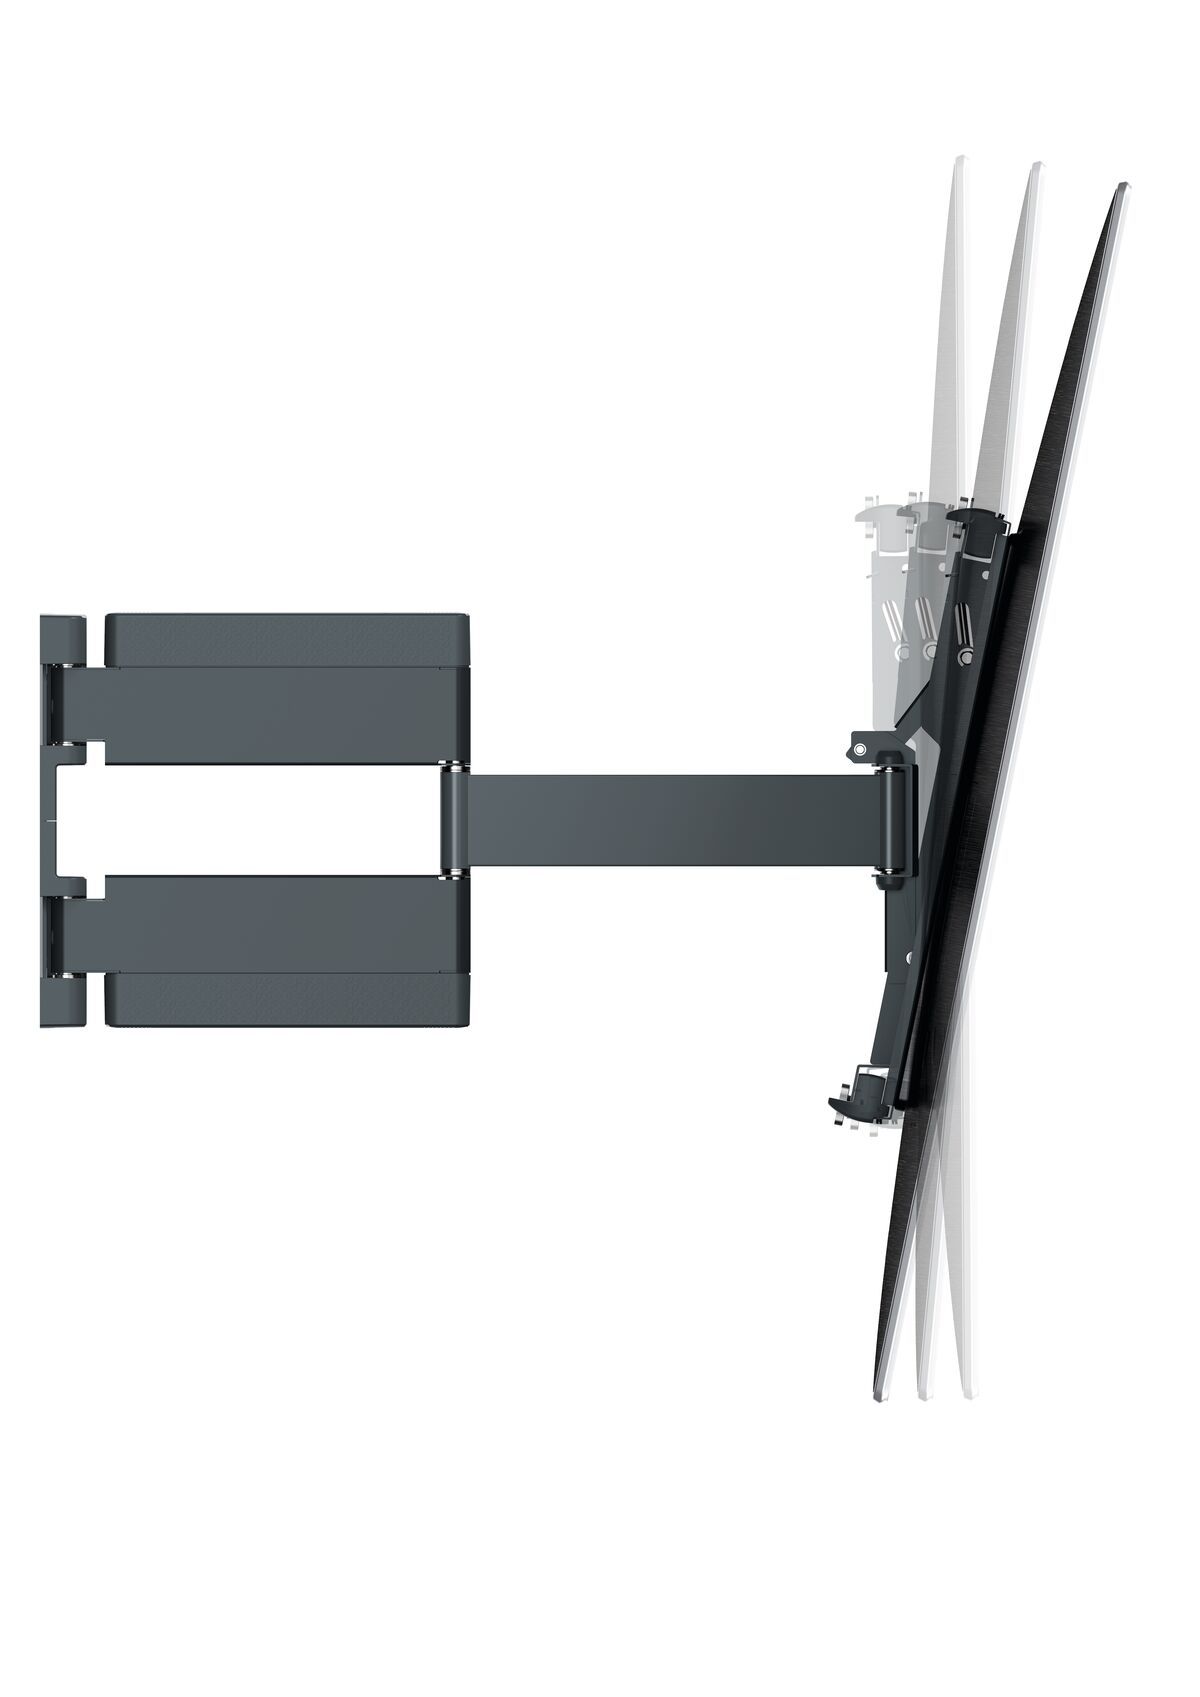 Vogel's THIN 550 ExtraThin Full-Motion TV Wall Mount - Suitable for 40 up to 100 inch TVs - Forward and turning motion (up to 120°) - Tilt up to 20° - Side view